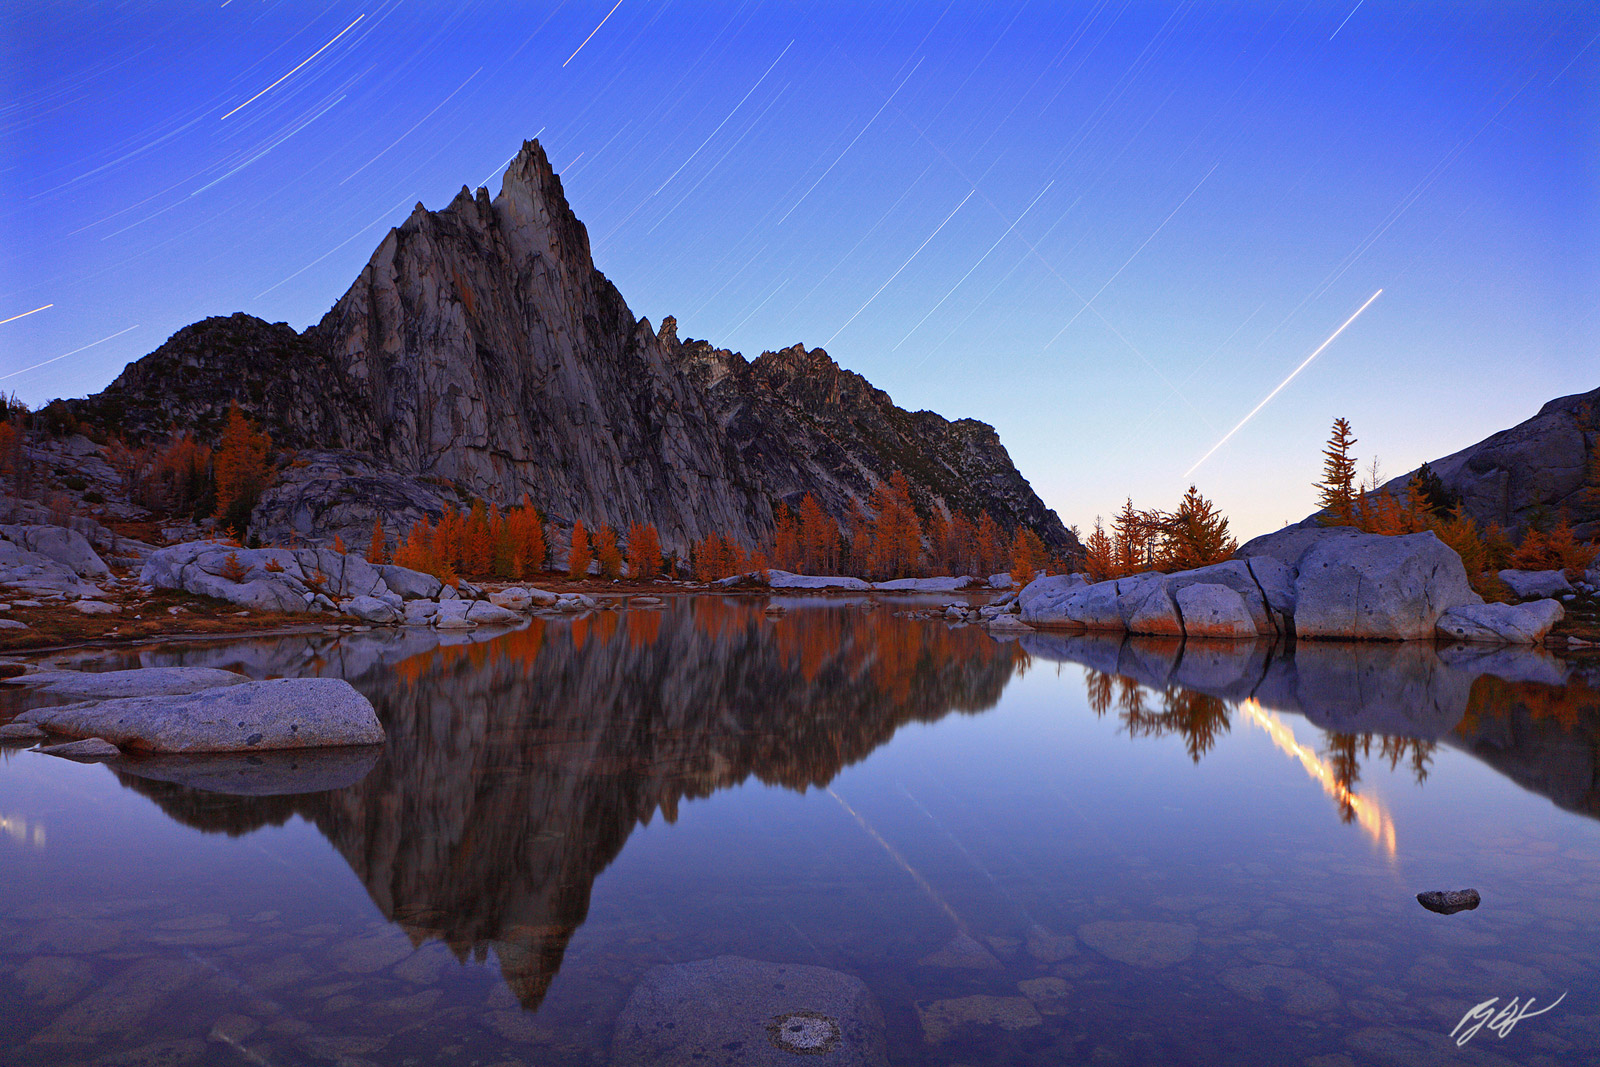 Star Trails and Prusik Peak Reflected in Gnome Tarn in the Enchantments, Alpine Lakes Wilderness, in Washington